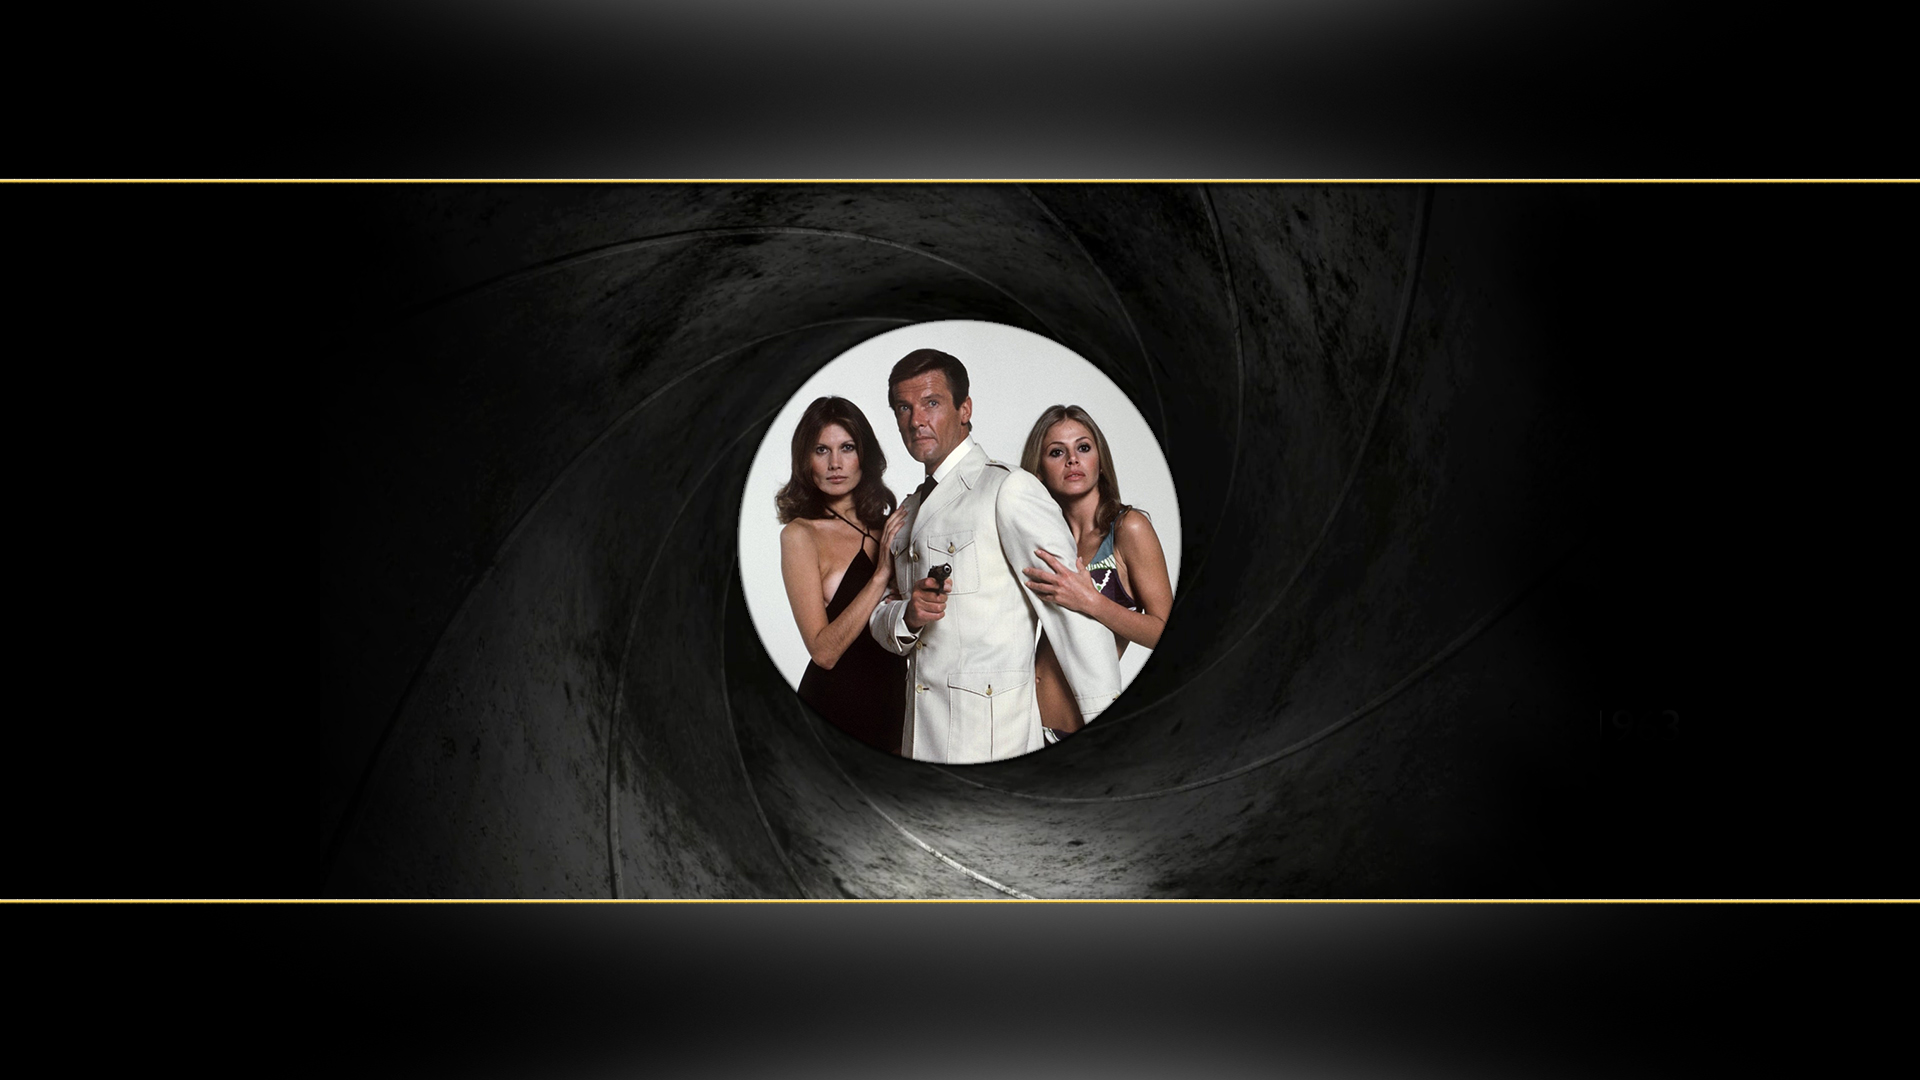 Movie The Man with the Golden Gun HD Wallpaper | Background Image